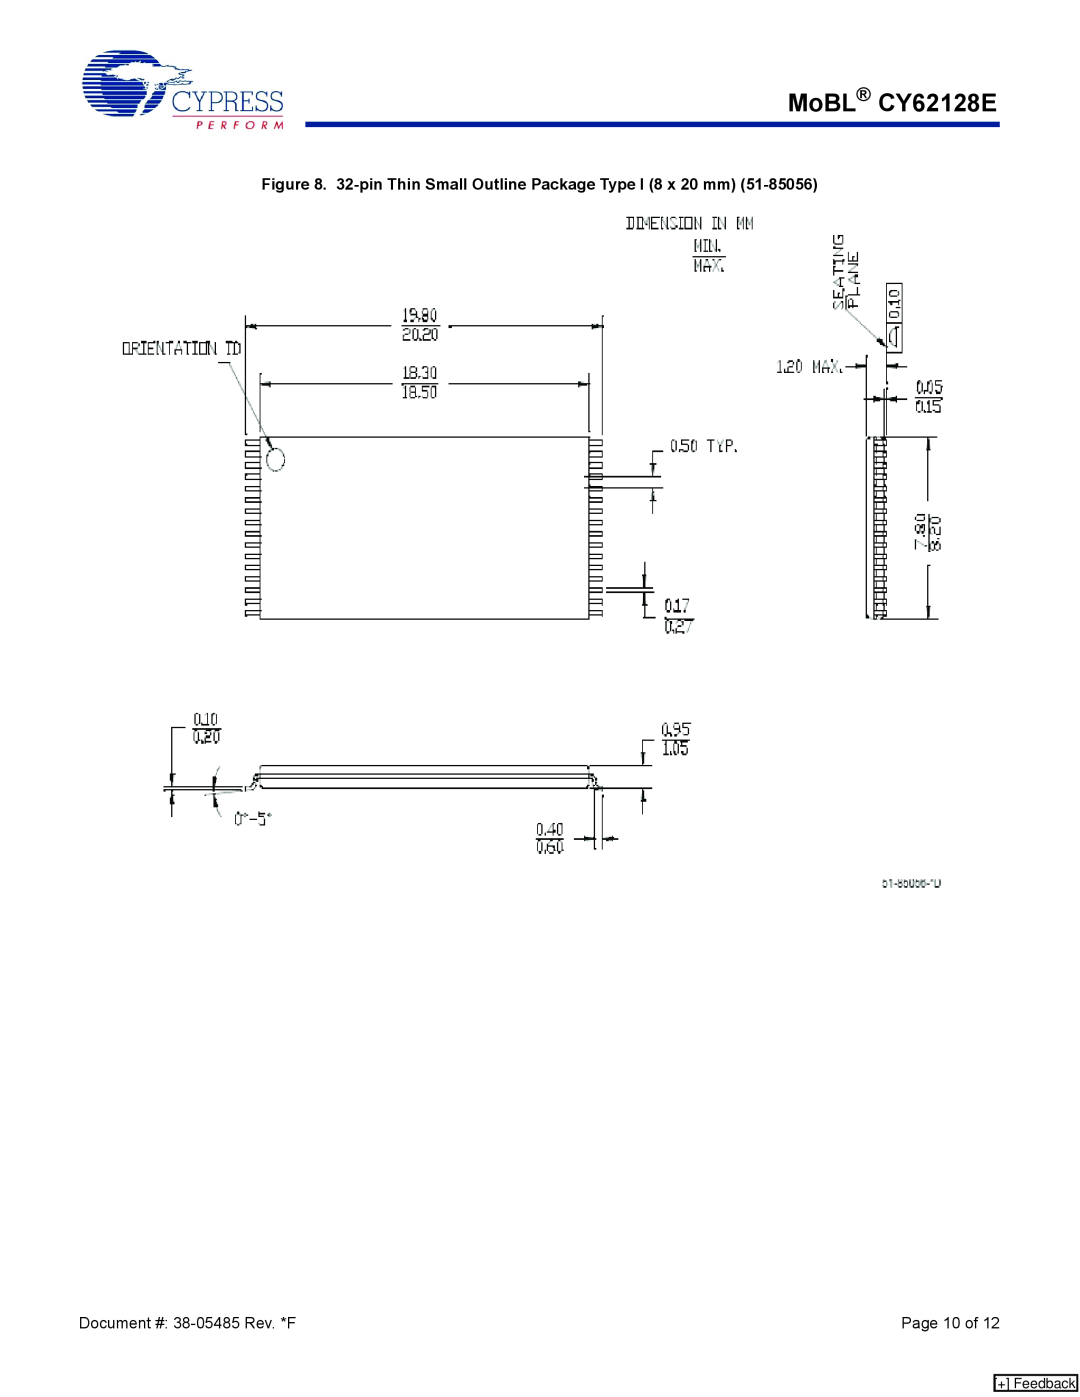 Cypress manual MoBL CY62128E, 32-pin Thin Small Outline Package Type I 8 x 20 mm, Page 10 of, + Feedback 